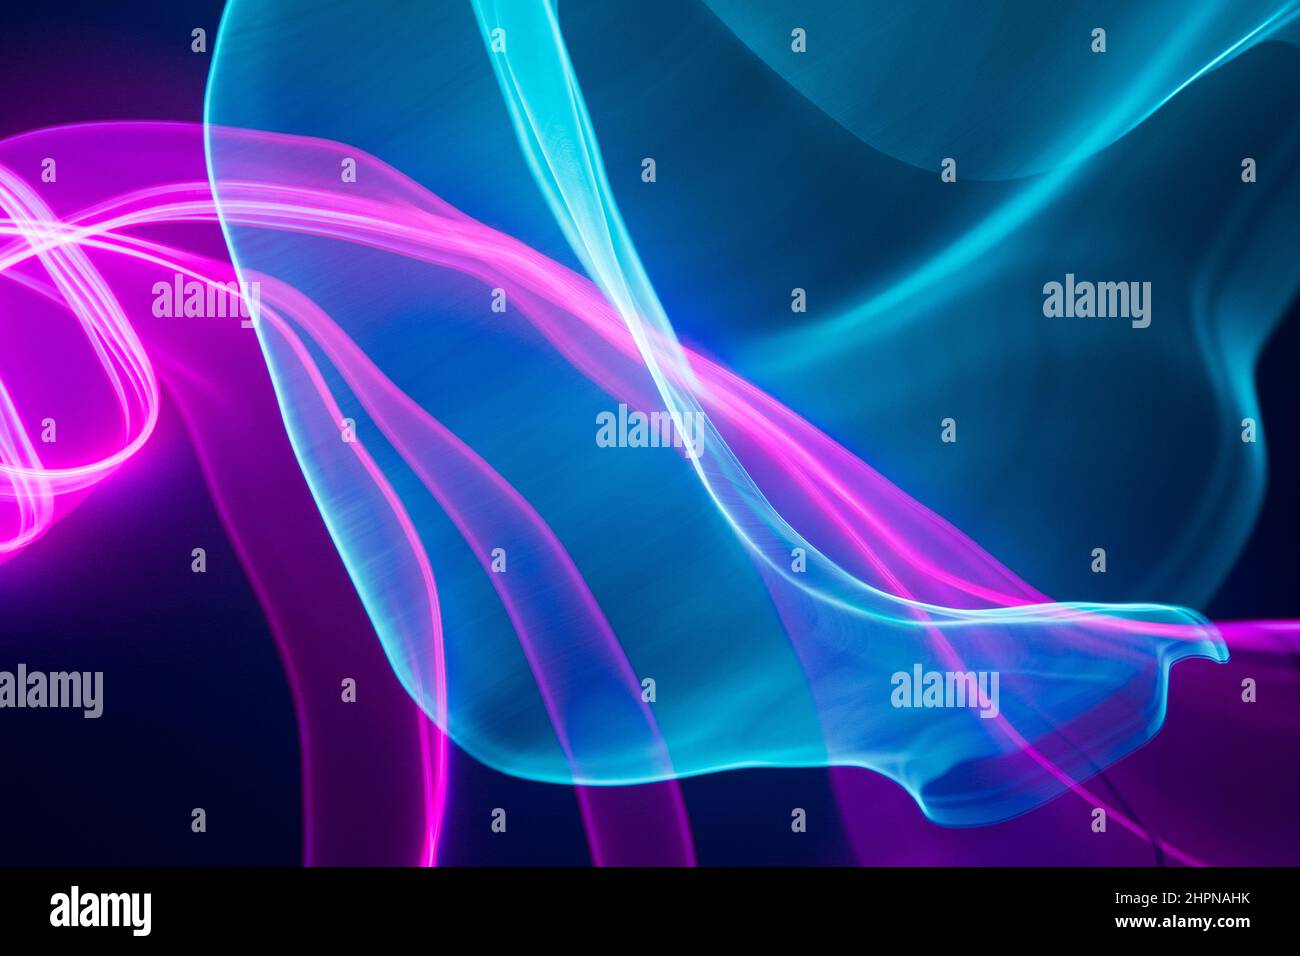 Neon blue and pink led lines on a dark night background. Vapor wave futuristic wallpaper. Stock Photo